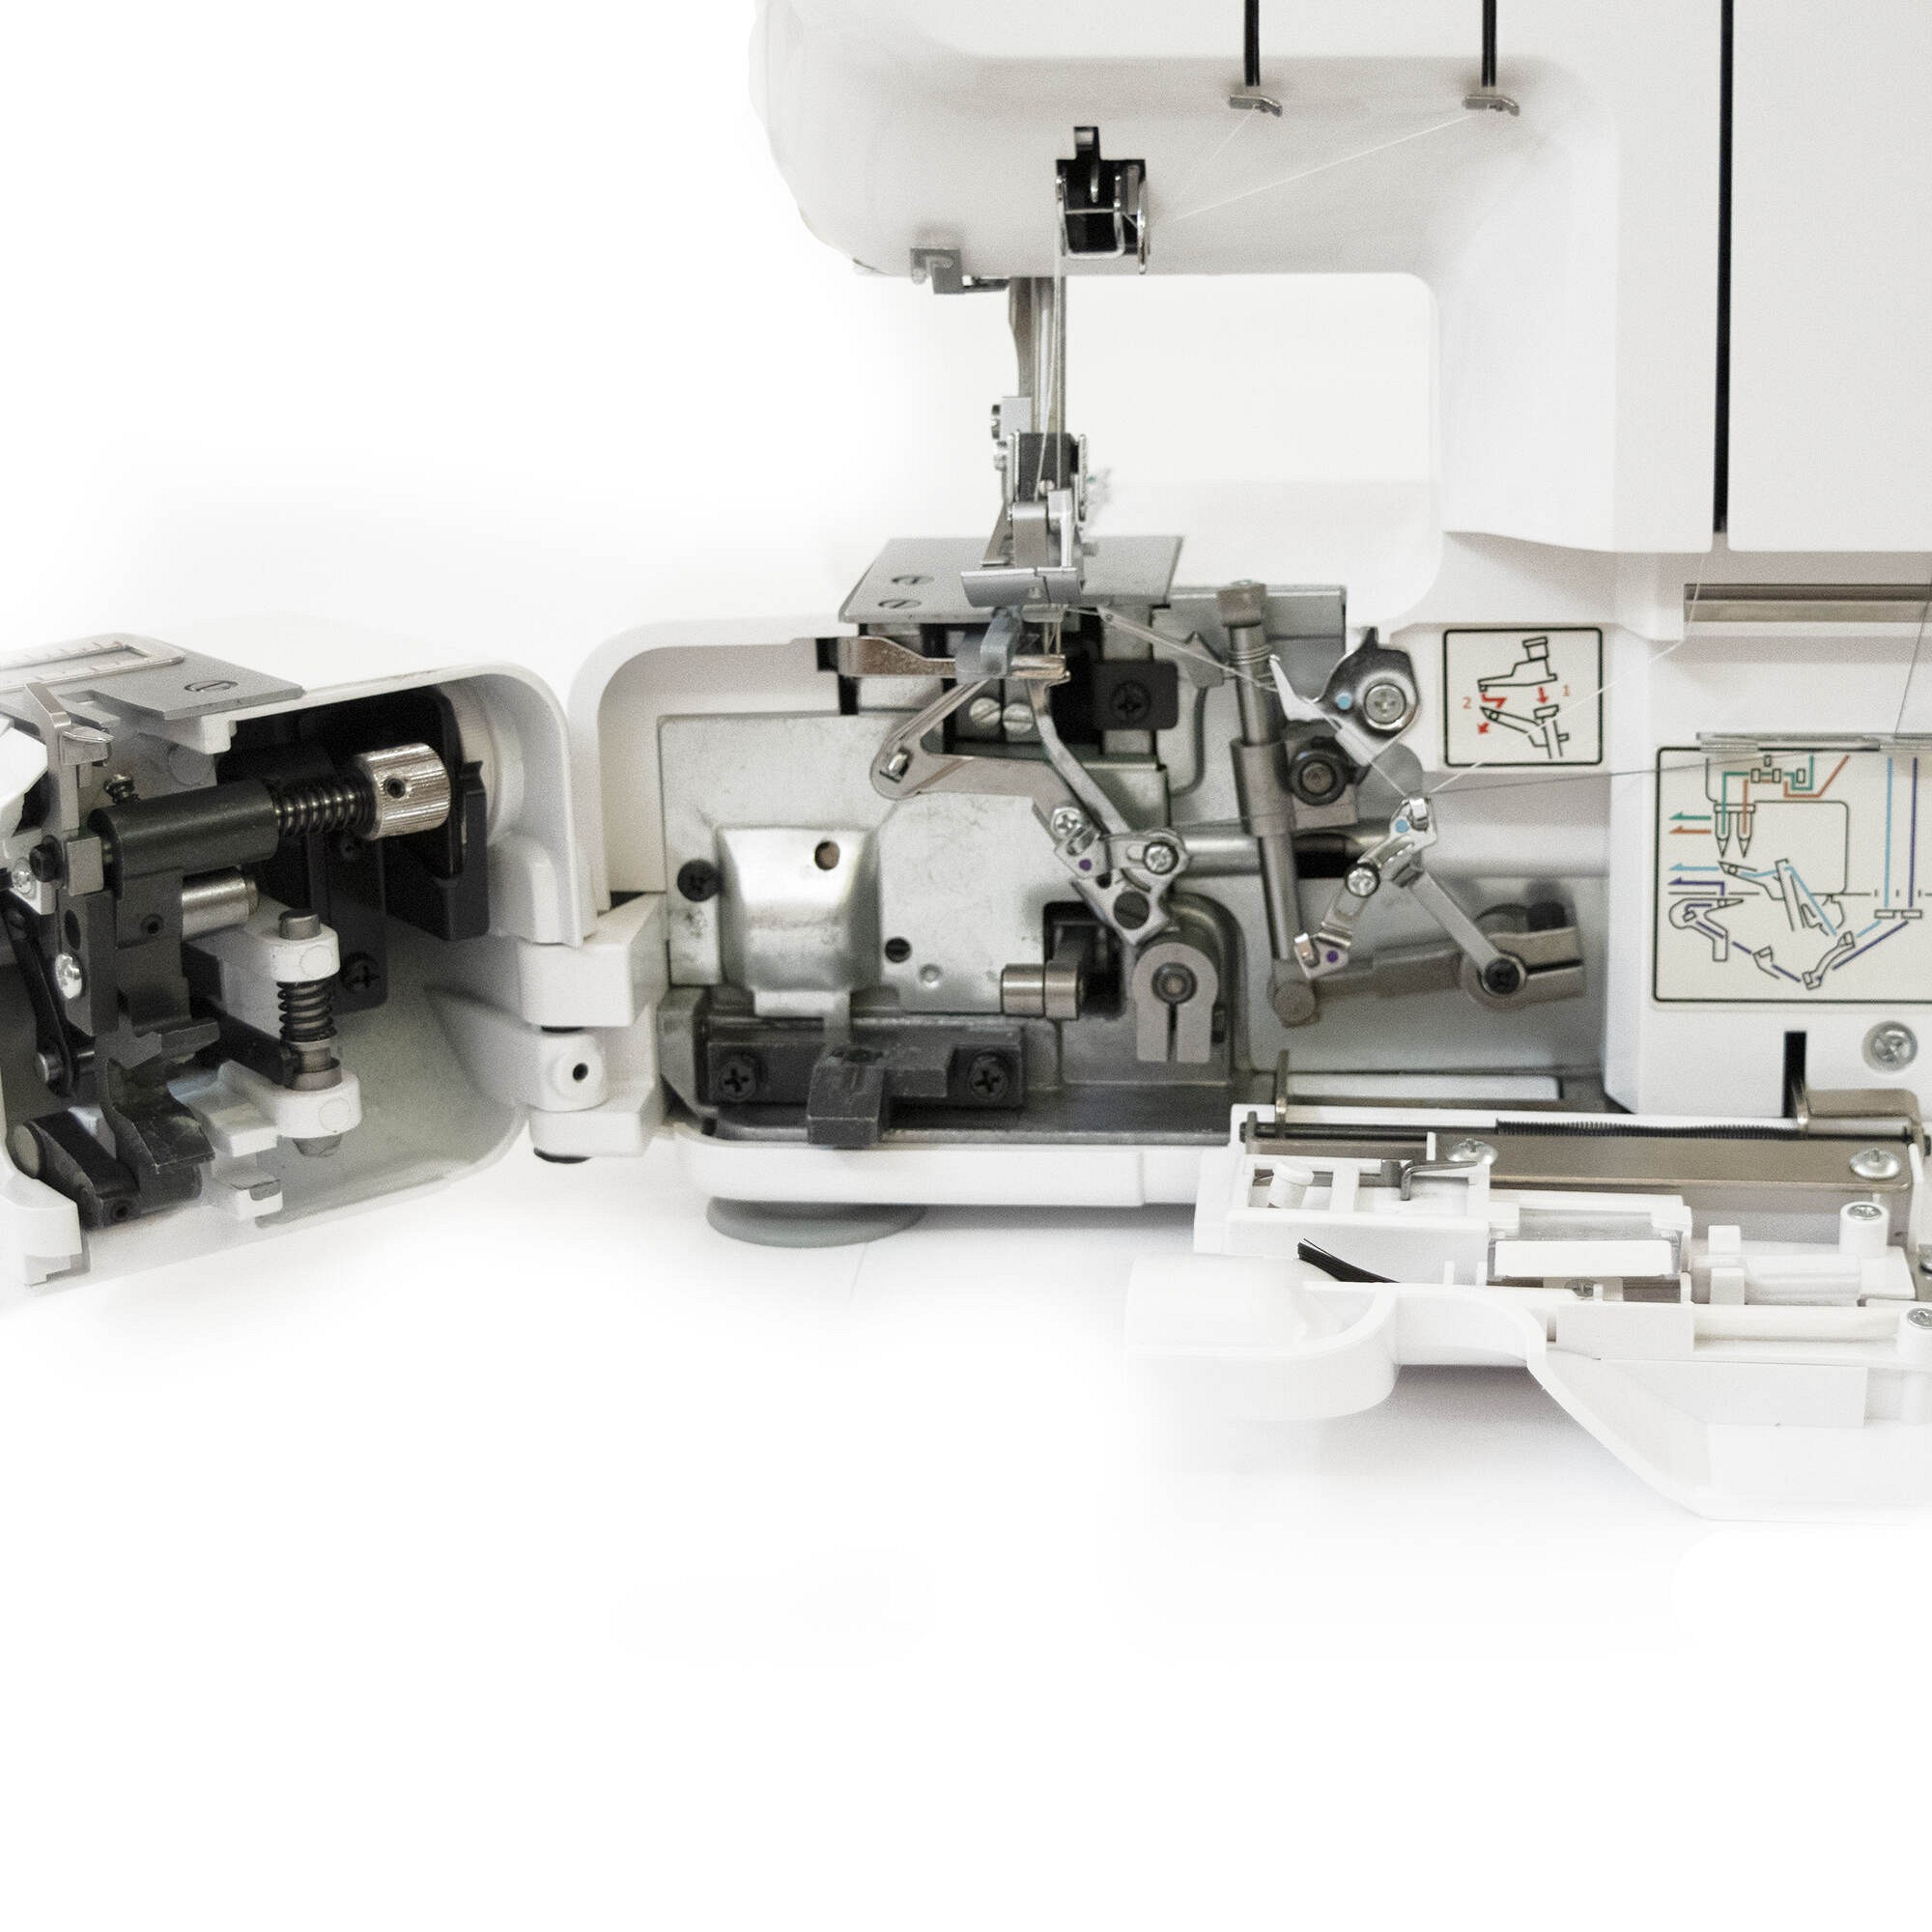 Jaguar HD-696 Sewing Machine (Quilting Edition) - The Ironing